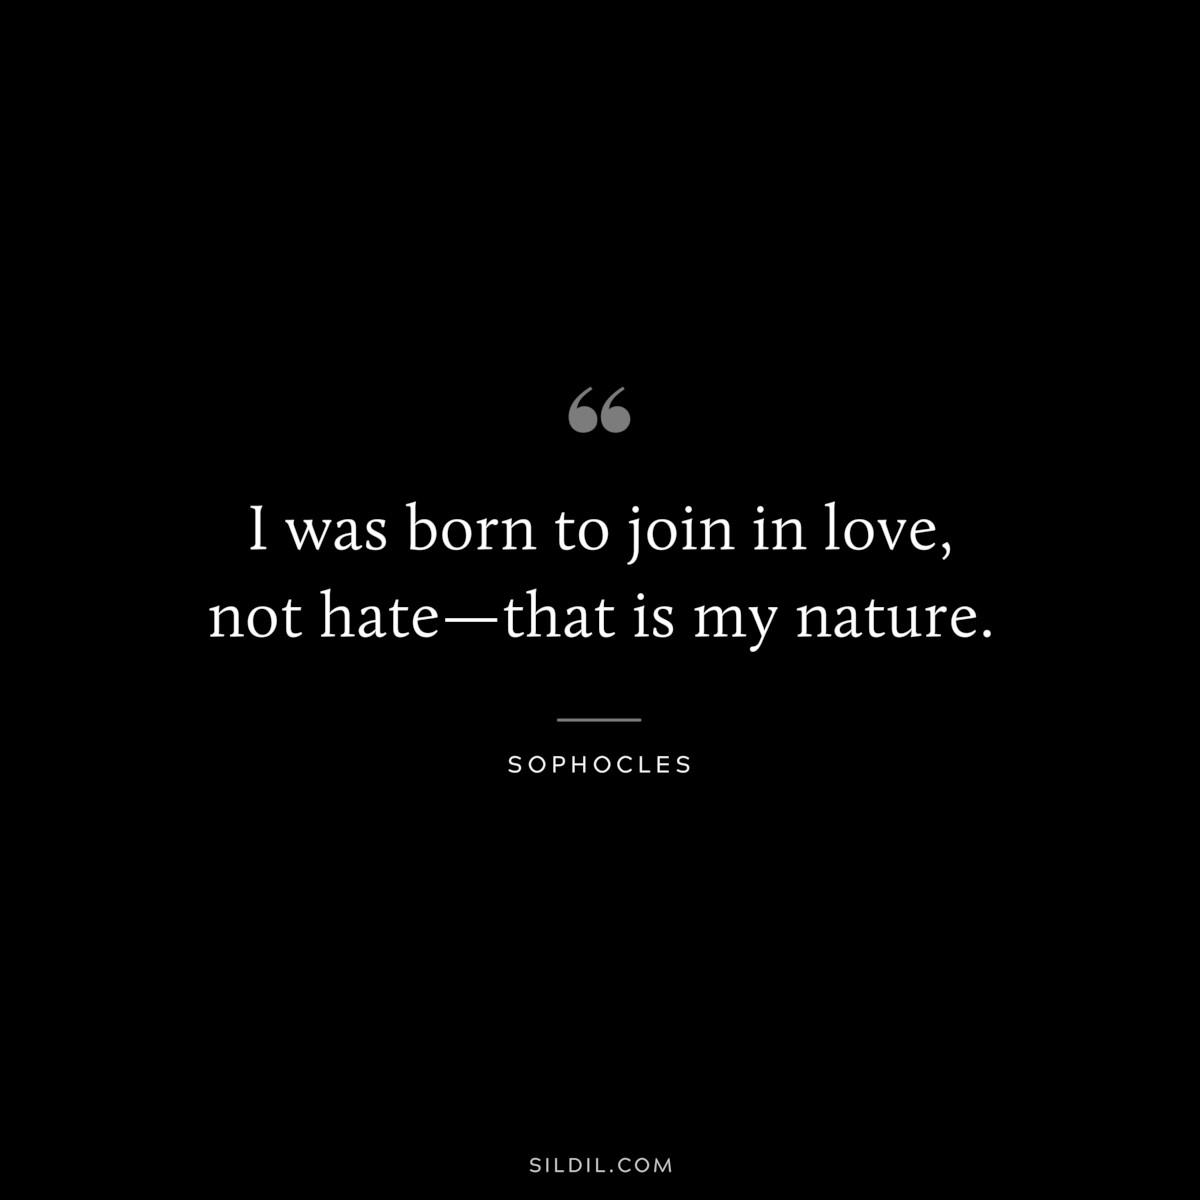 I was born to join in love, not hate—that is my nature. ― Sophocles